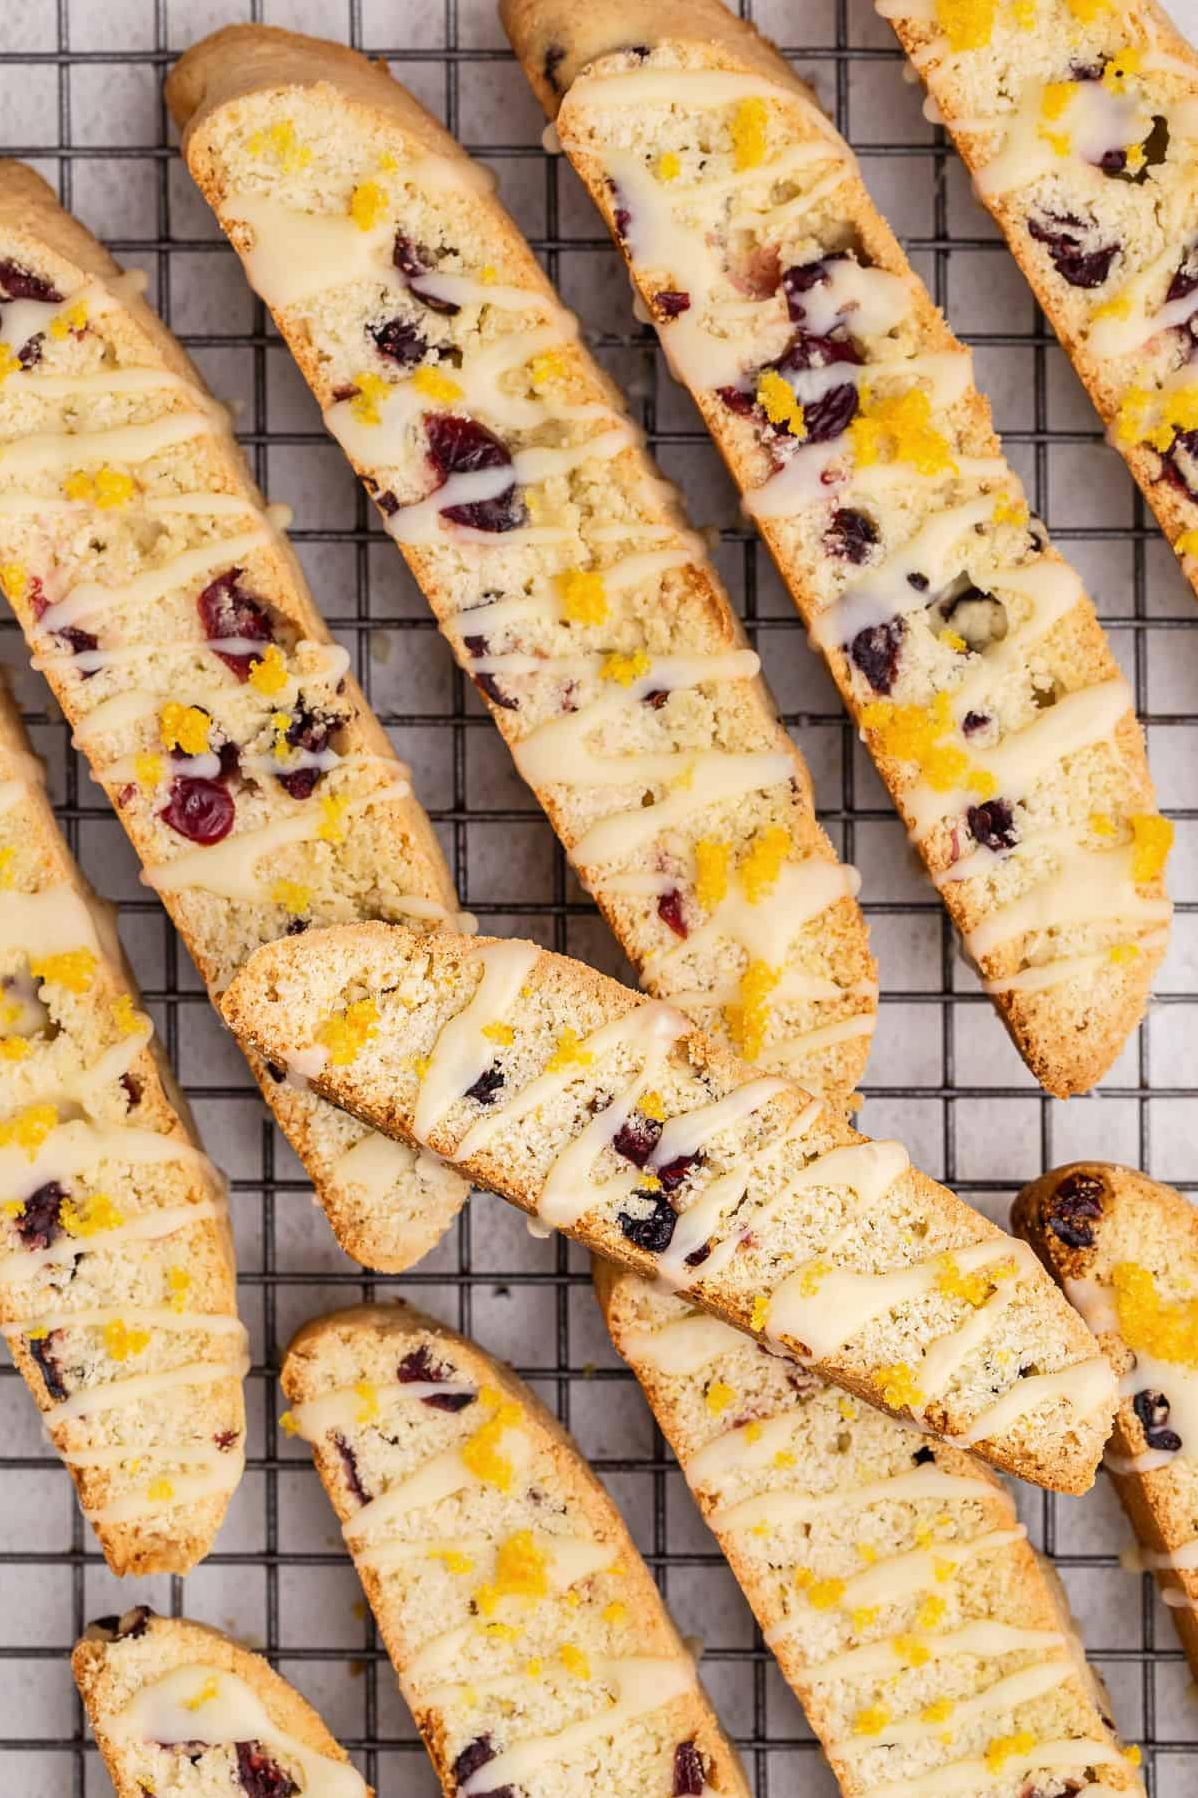  A biscotti that brings together the flavors of tangy cranberries and rich coffee.